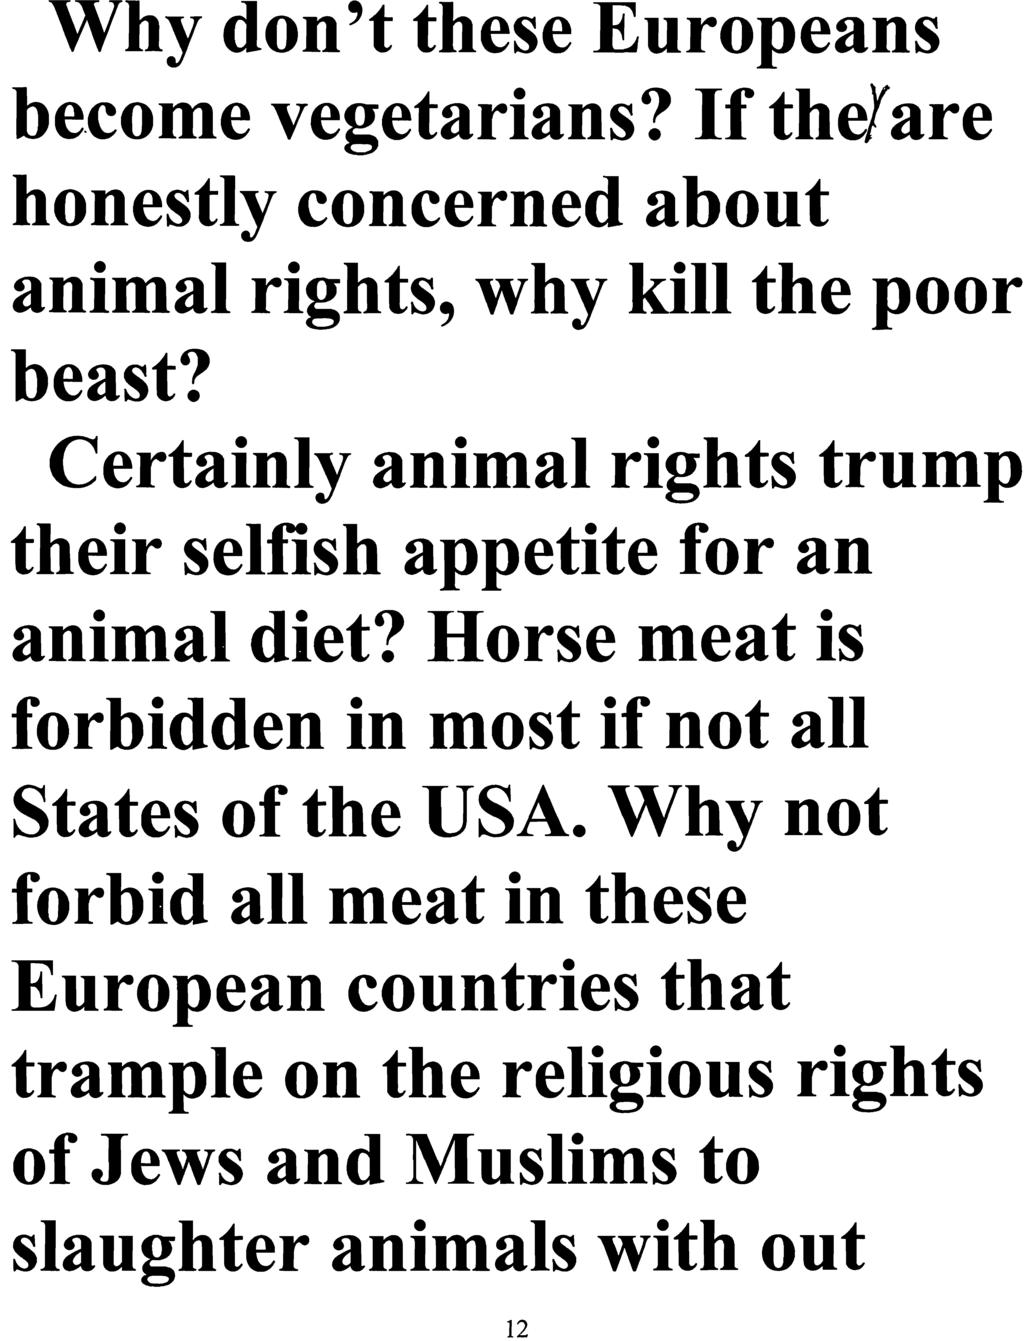 Why don't these Europeans become vegetarians? If they are honestly concerned about animal rights, why kill the poor beast? Certainly animal rights trump their selfish appetite for an animal diet?